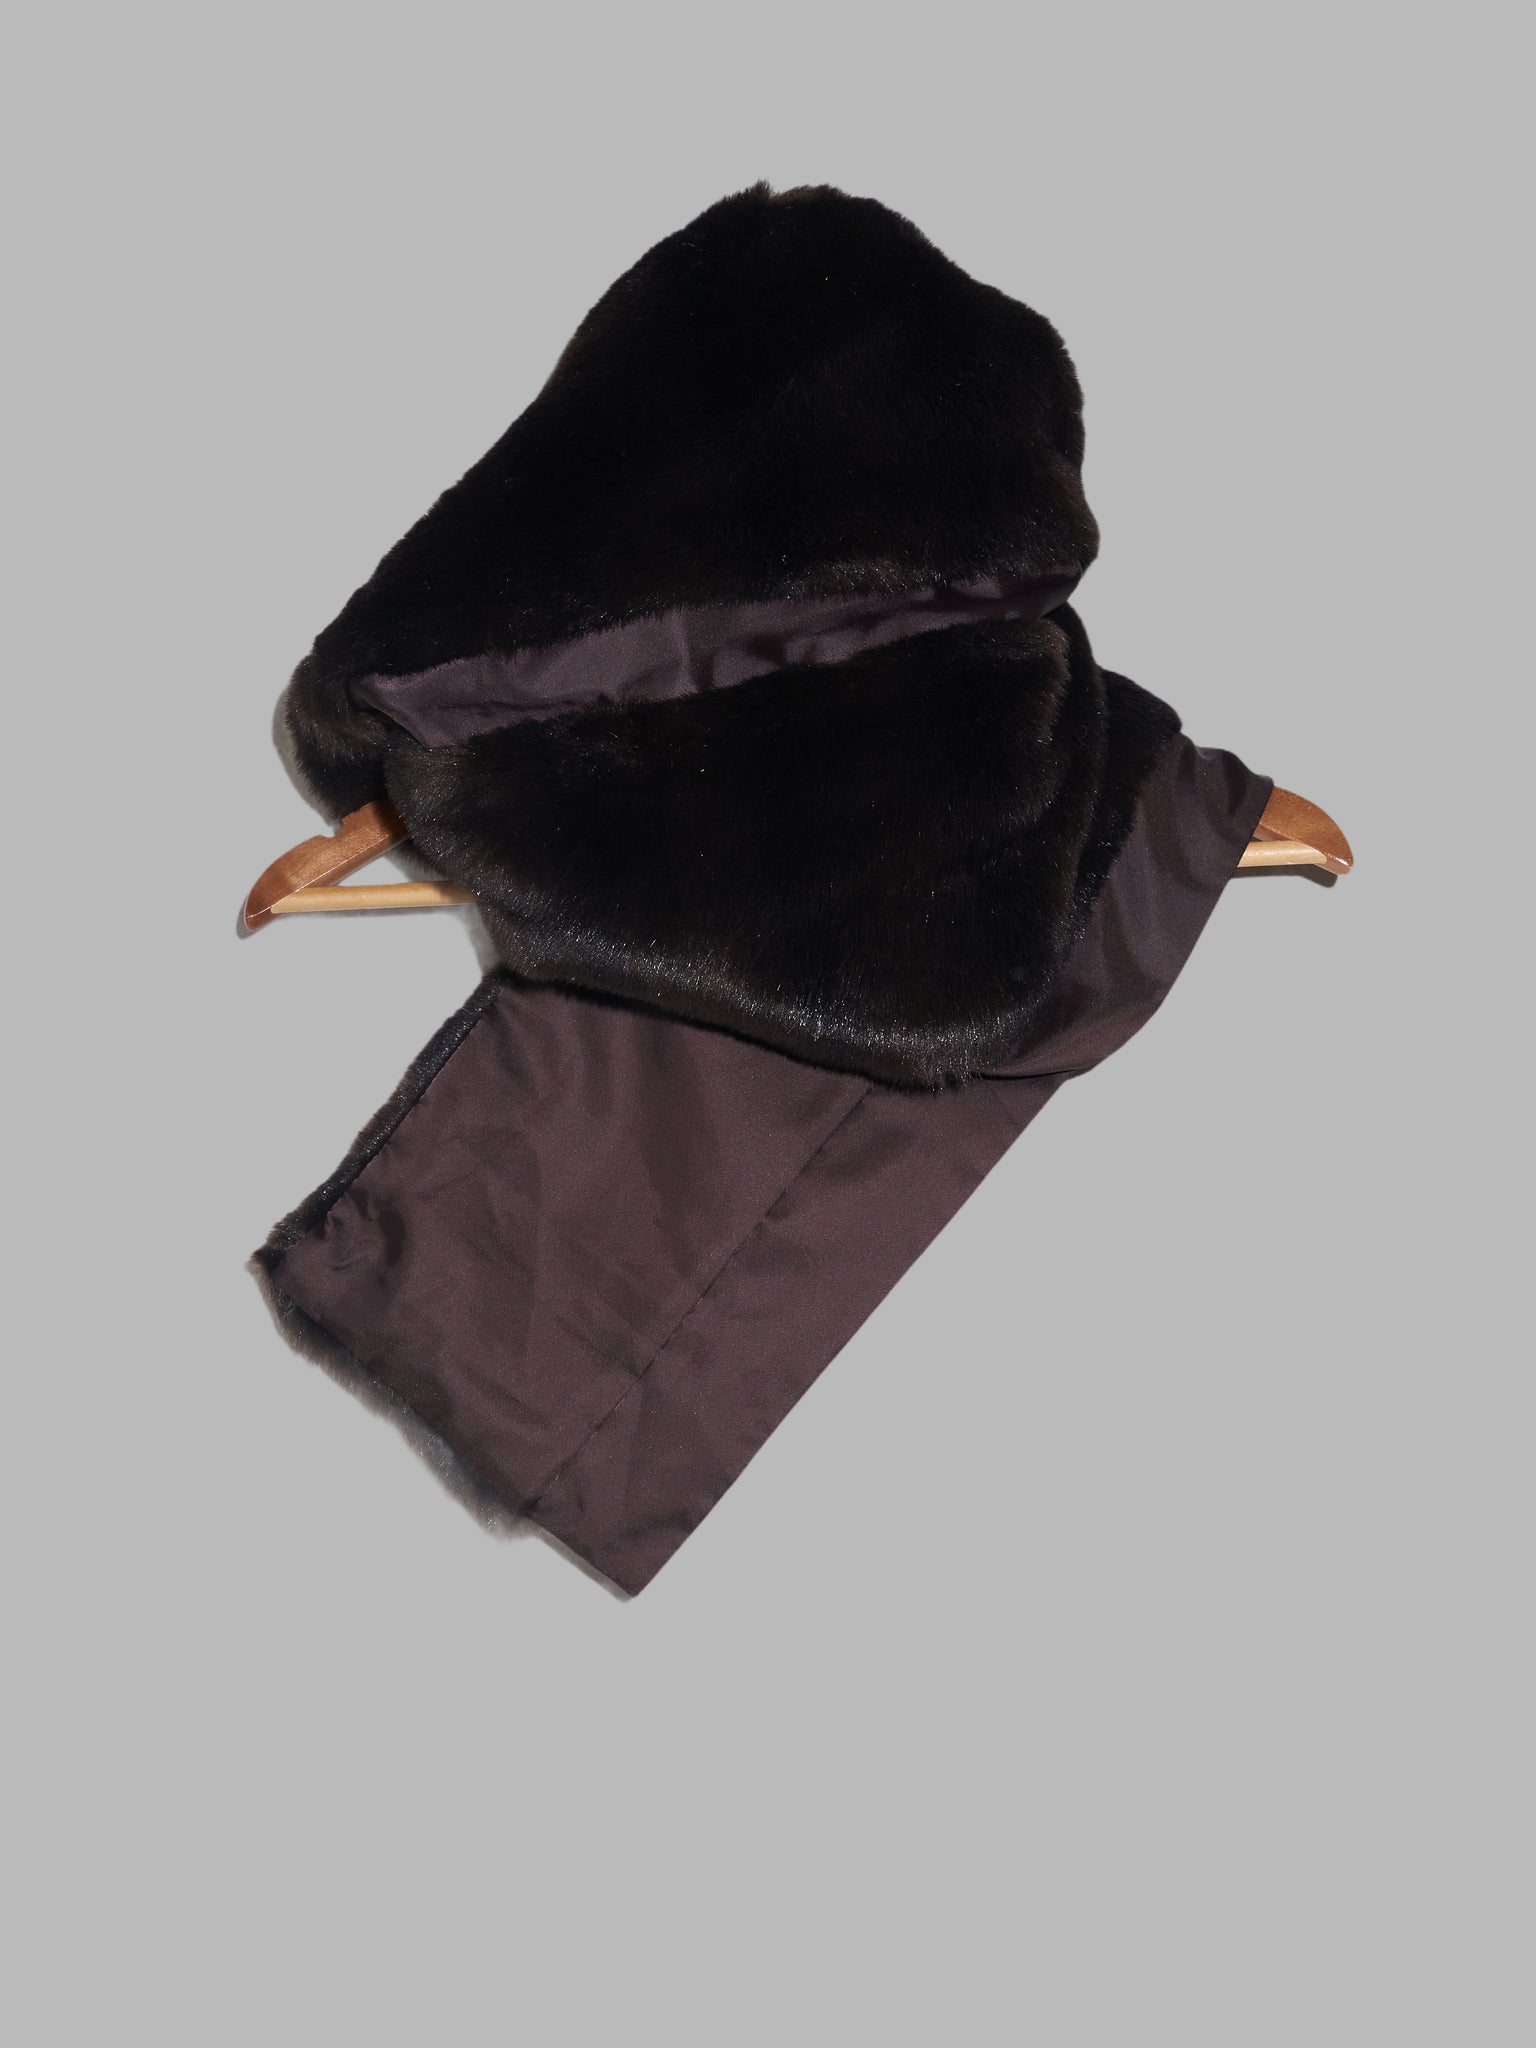 Comme des Garcons AW1997 brown acrylic faux fur snood or neck warmer